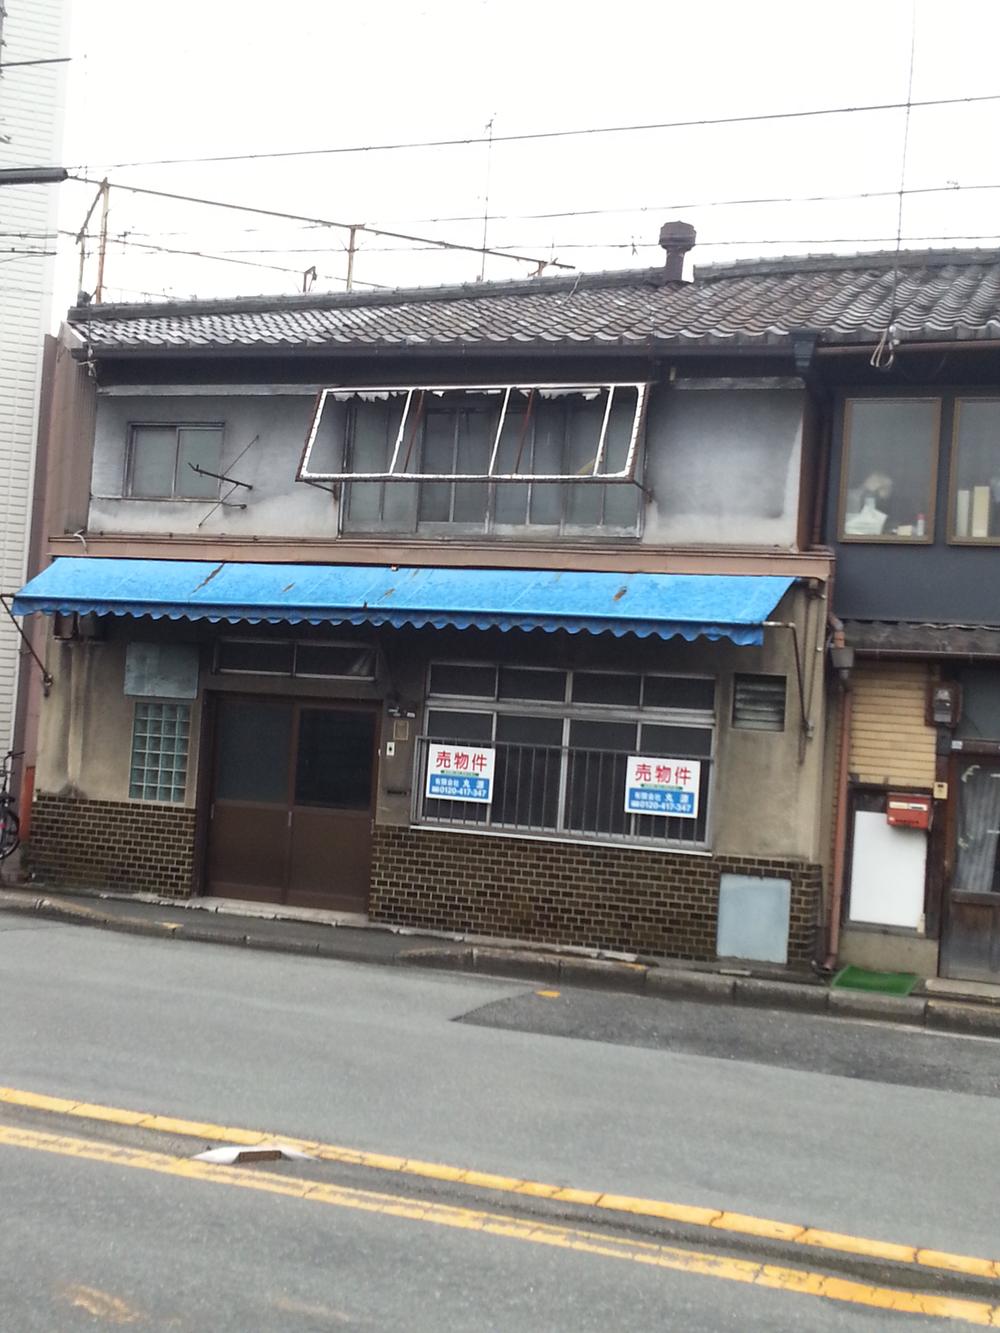 Local land photo. Furuya with selling land, Mu building conditions